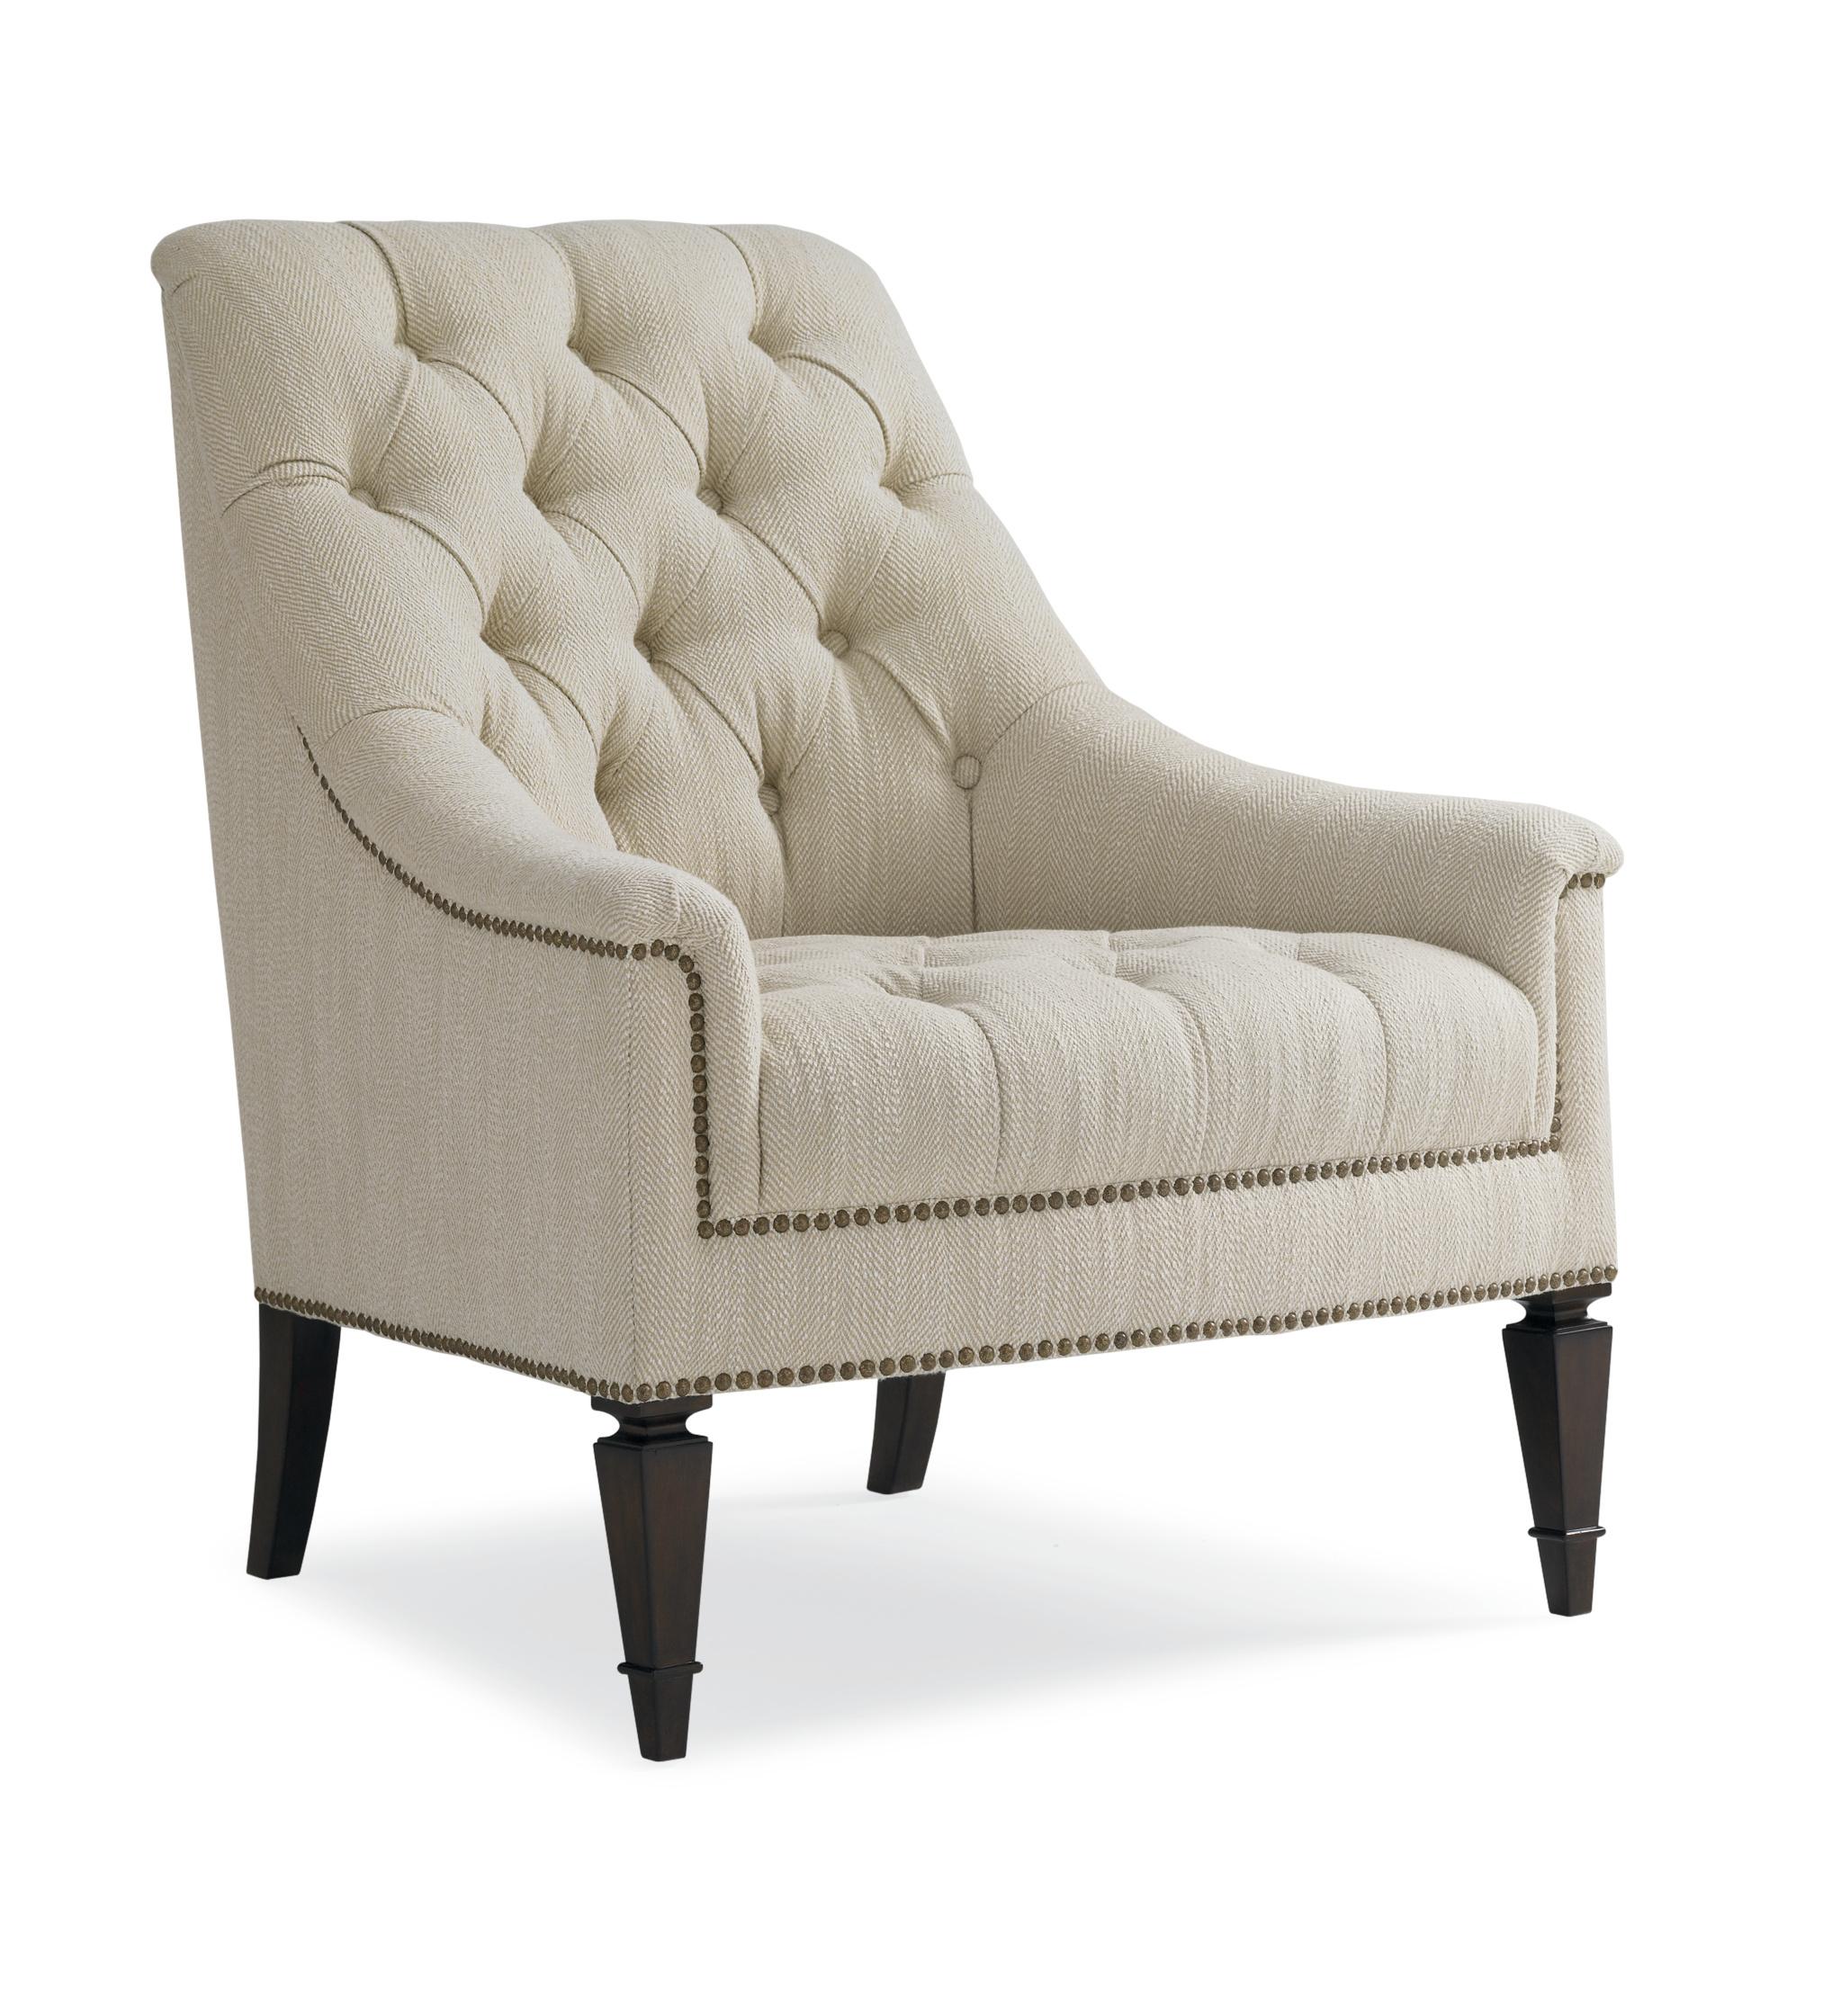 

    
Button-Tufted Natural Textured Herringbone Fabric Chair CLASSIC ELEGANCE by Caracole
